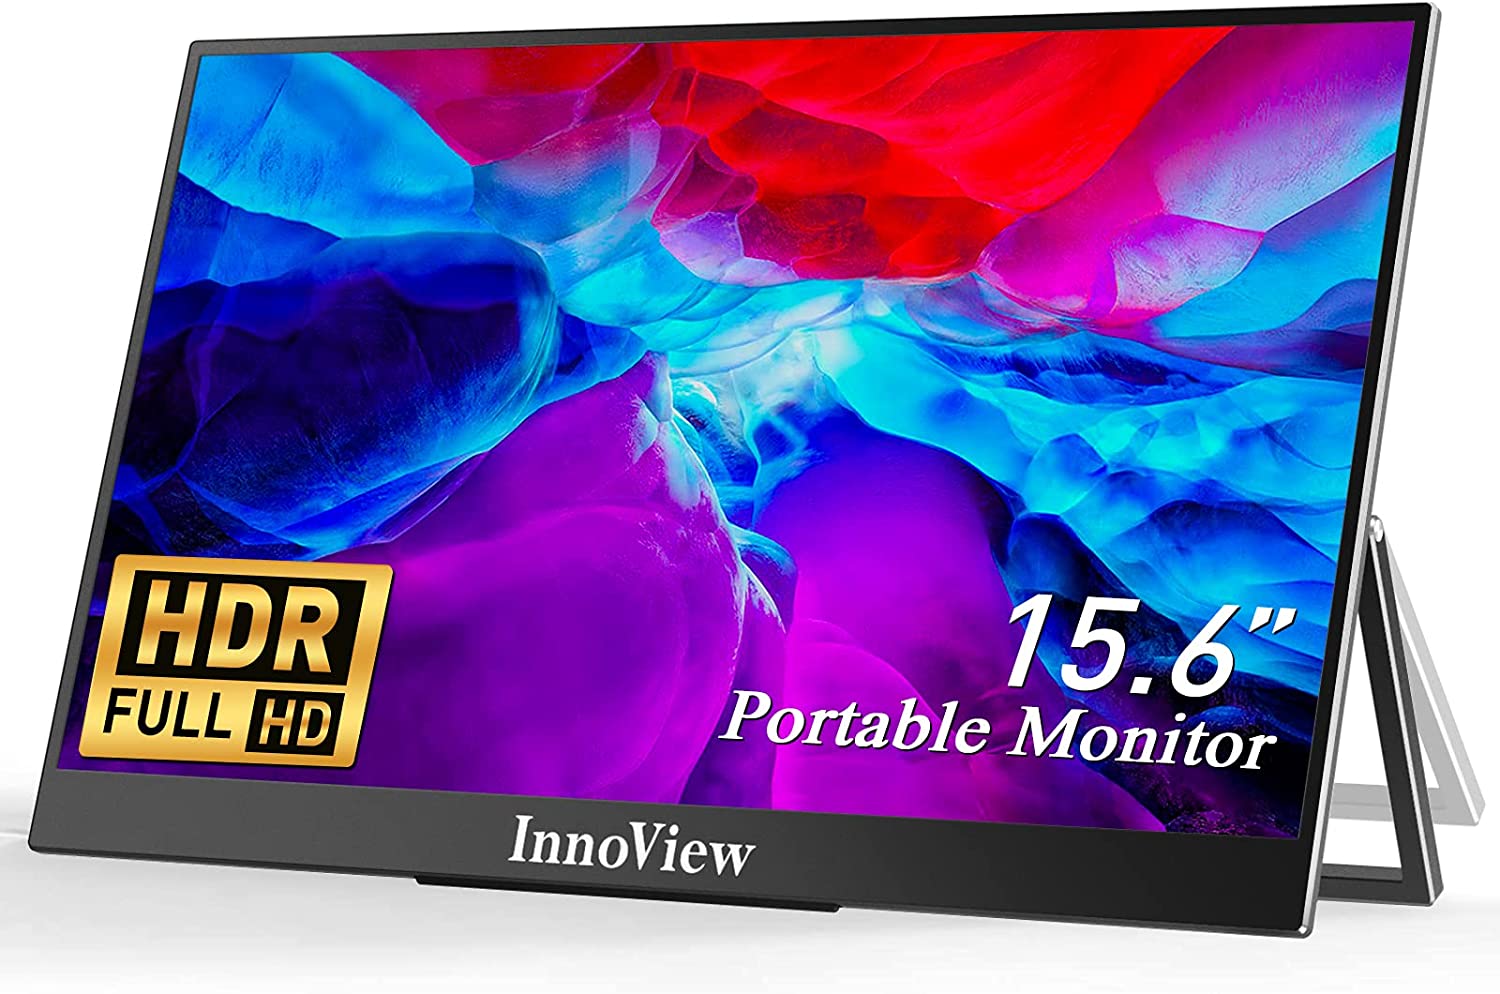 InnoView Portable Monitor